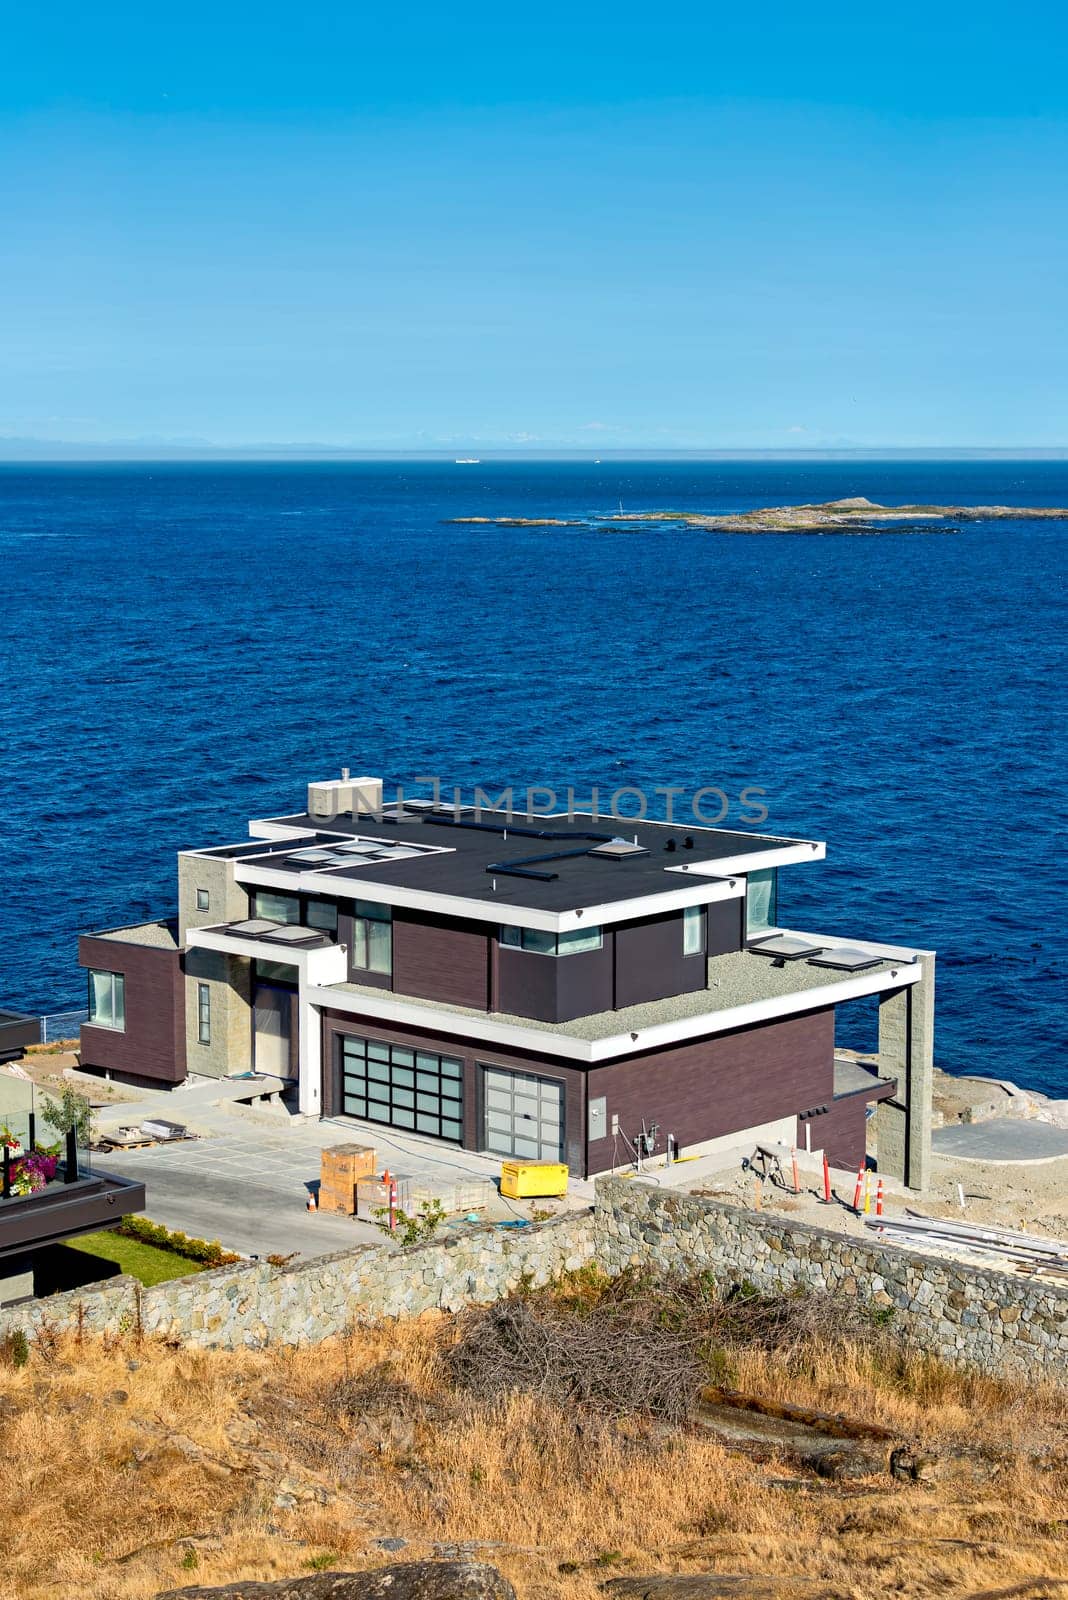 A perfect neighborhood. Luxury residential house under construction on Pacific ocean shore.